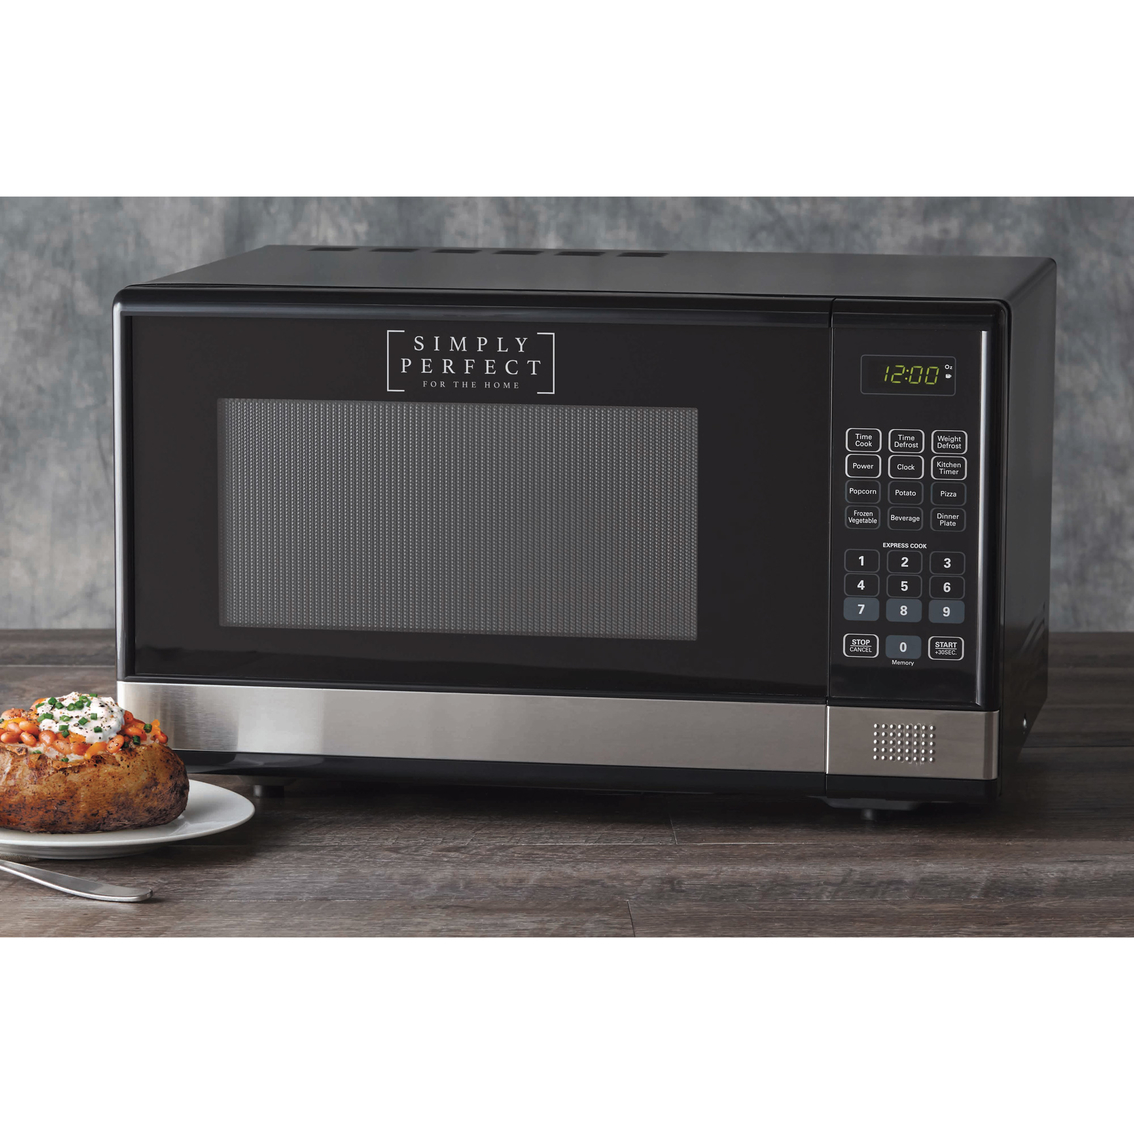 Simply Perfect 1.1 cu. ft. Stainless Steel Microwave Oven - Image 2 of 2